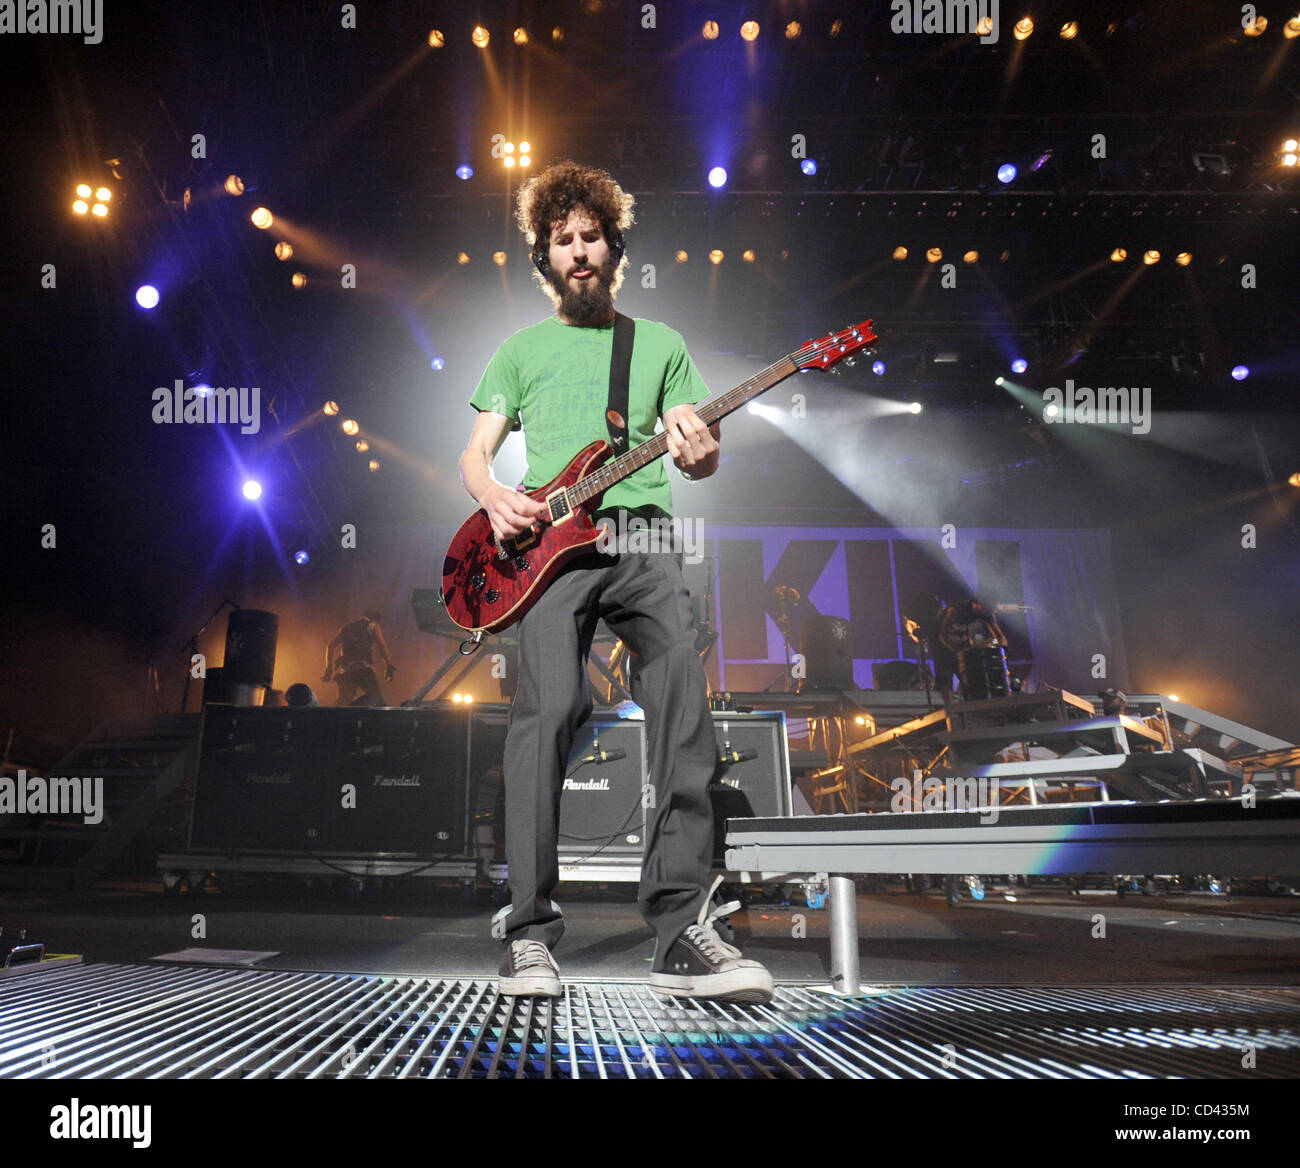 July 25, 2008 - Raleigh, North Carolina; USA - Lead Guitarist BRAD DELSON of the band Linkin Park performs live as the 2008 Projekt Revolution Tour makes a stop at the Time Warner Cable Music Pavilion located in North Carolina. Copyright 2008 Jason Moore. Mandatory Credit: Jason Moore Stock Photo